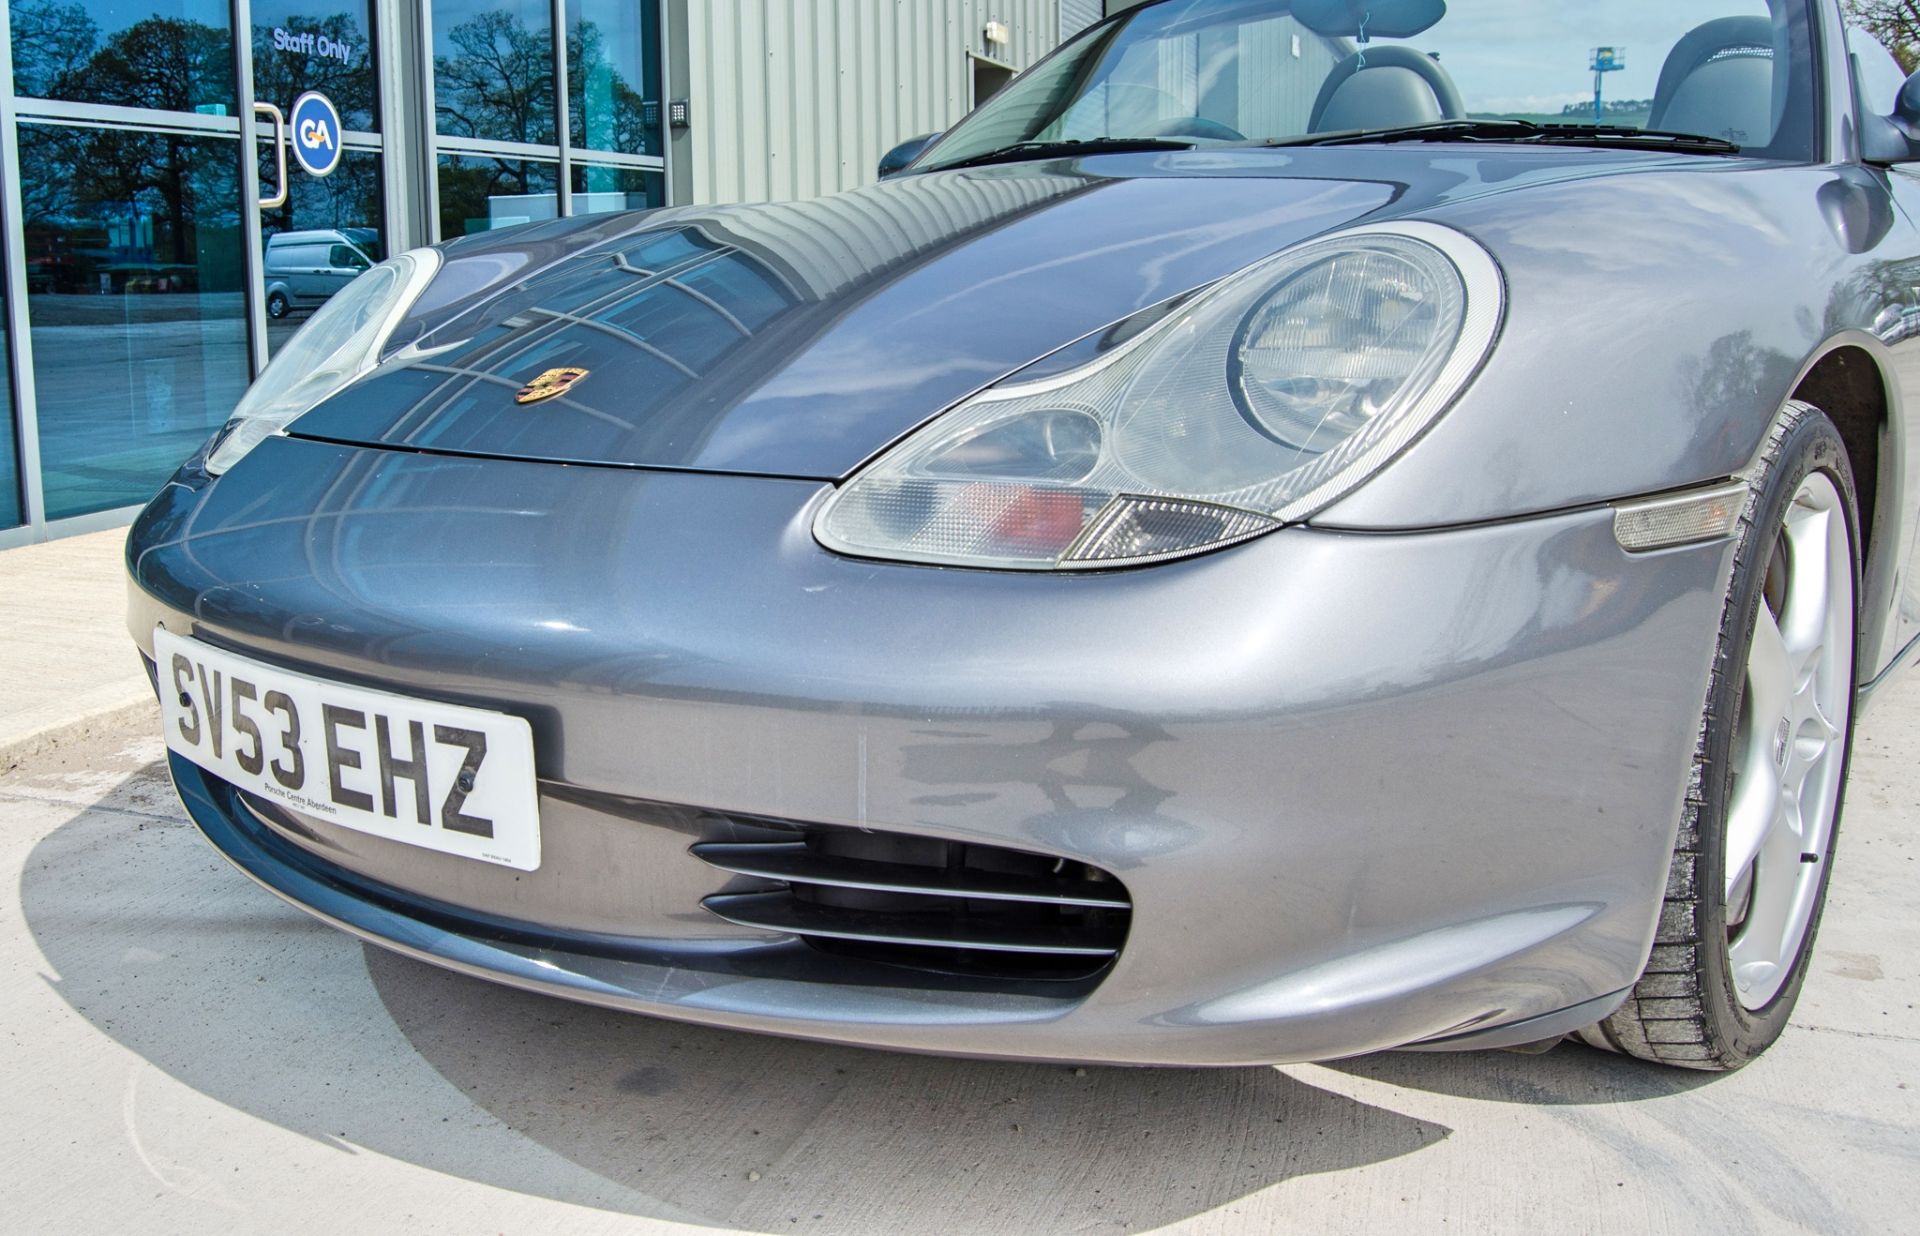 2003 Porsche Boxster 2.7 5 speed manual convertible roadster - Image 22 of 50